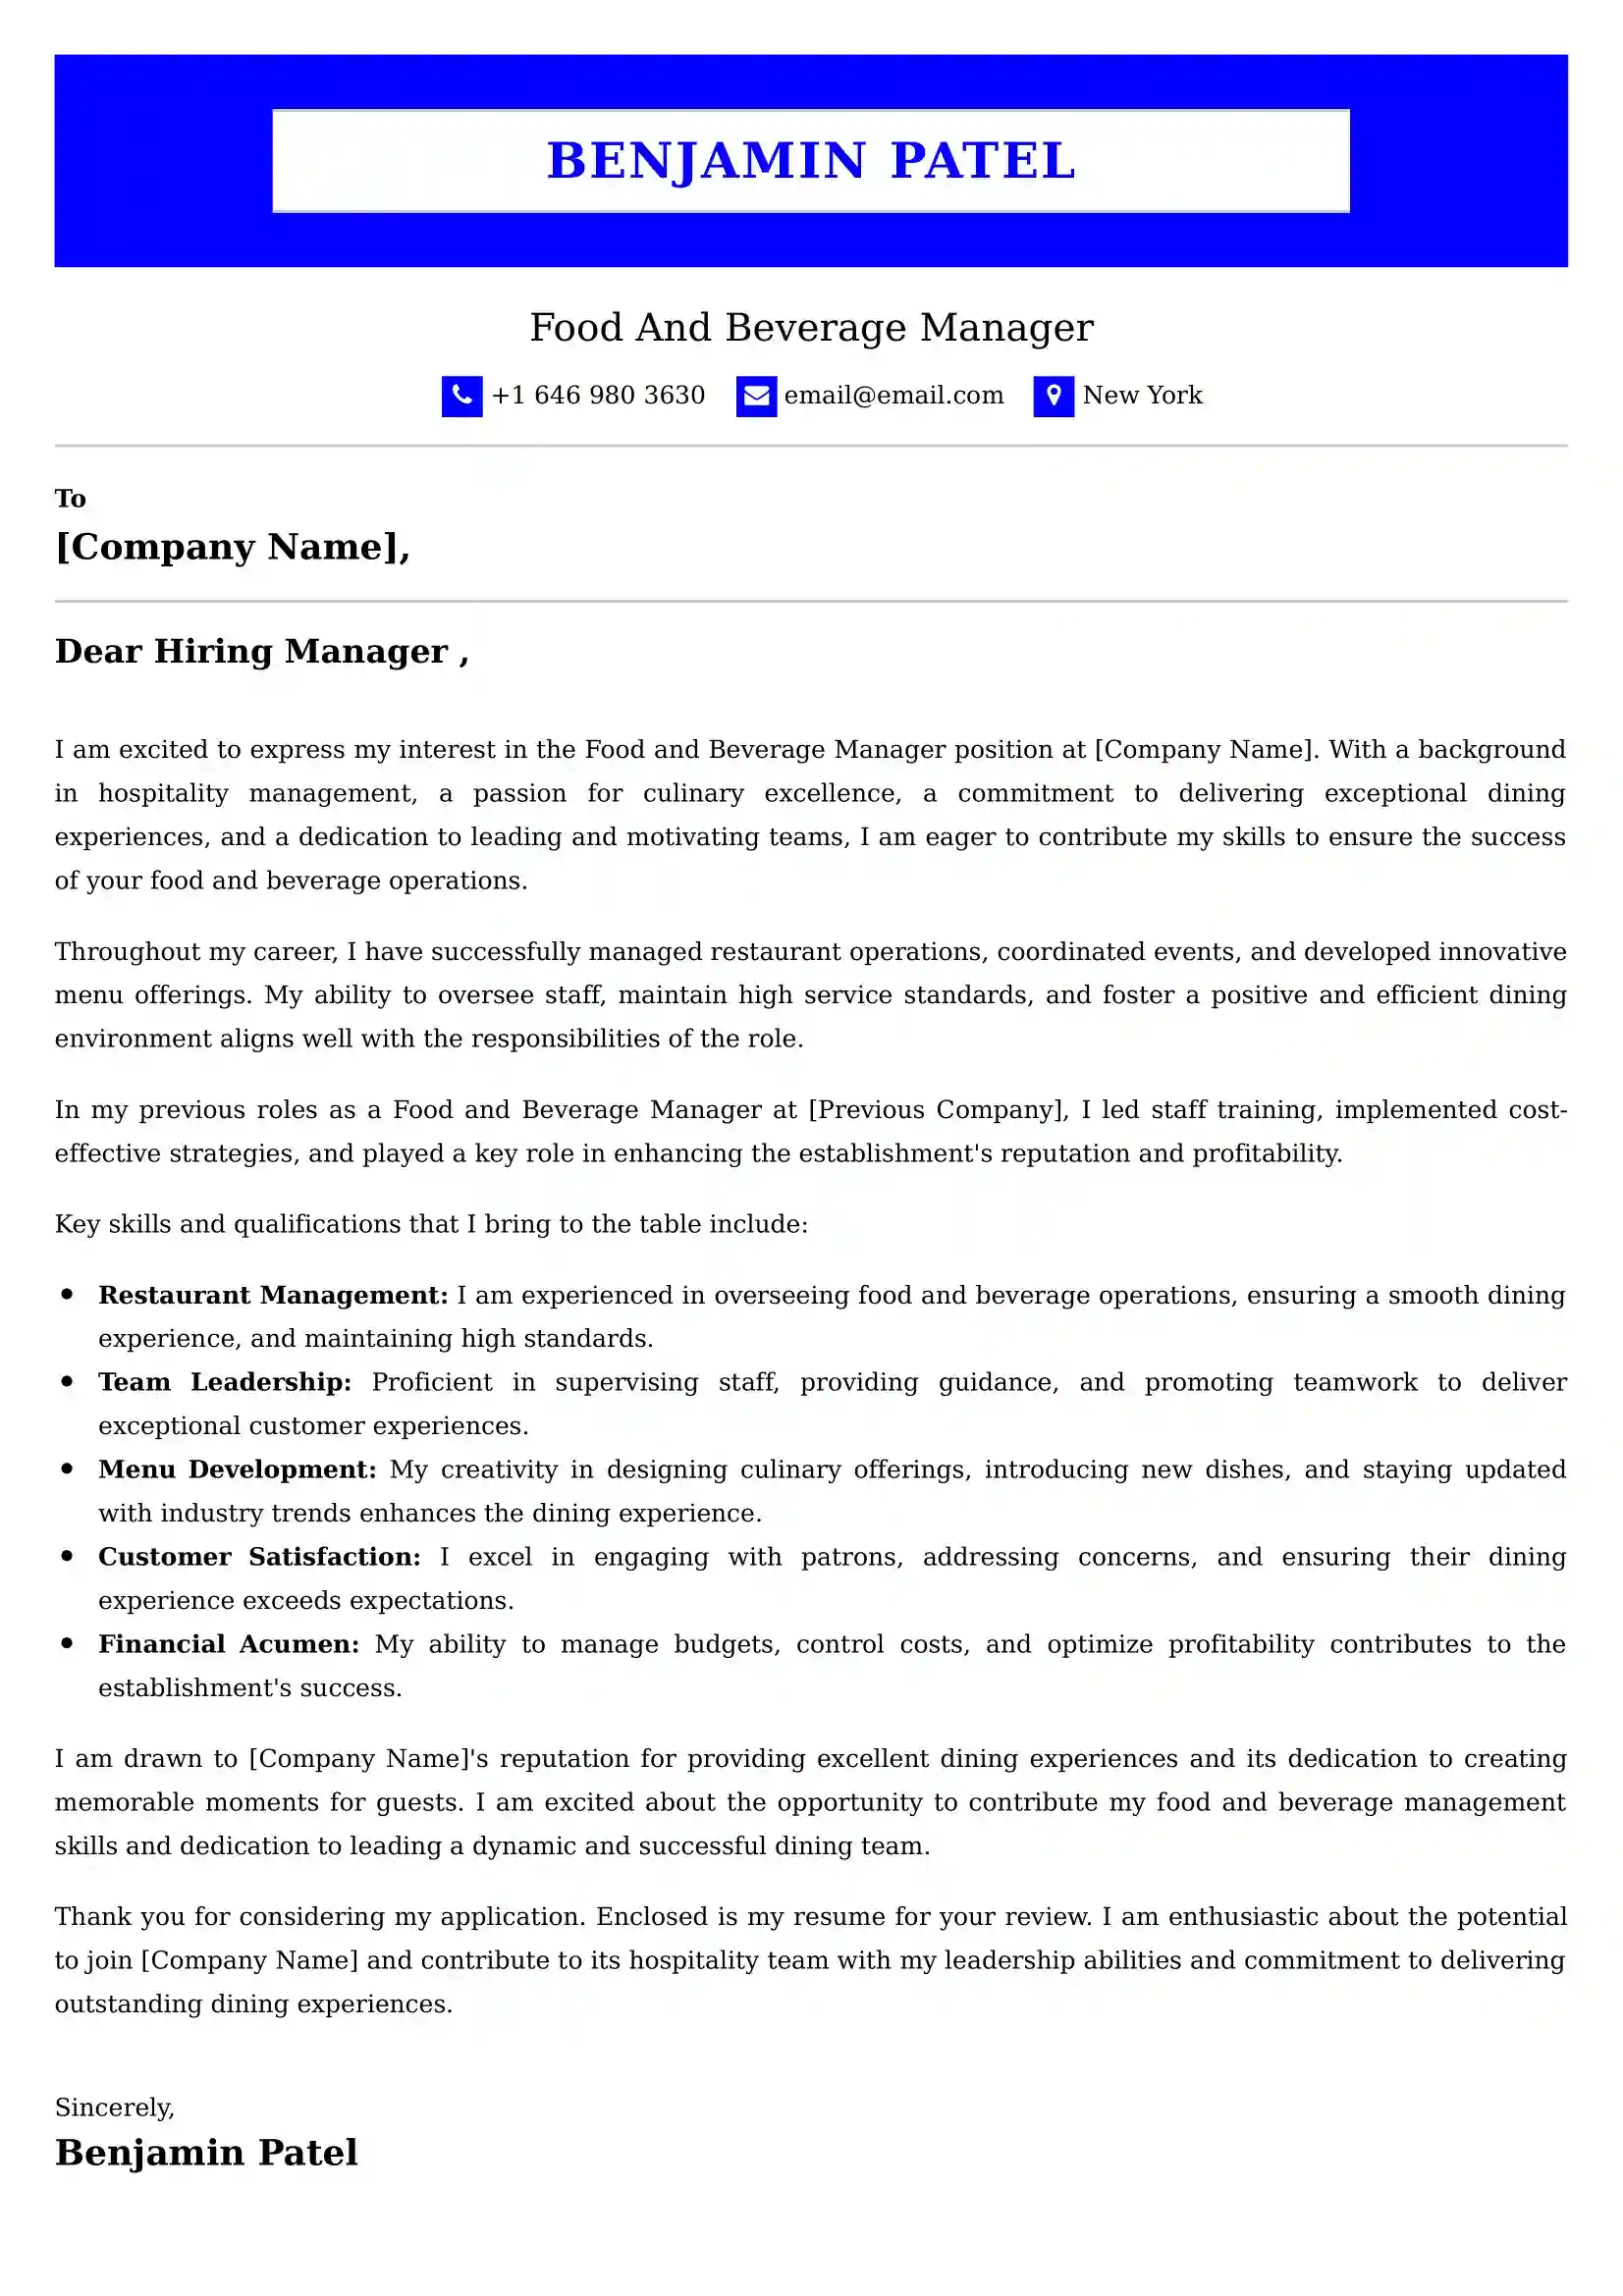 Food And Beverage Server Cover Letter Examples - Latest UK Format